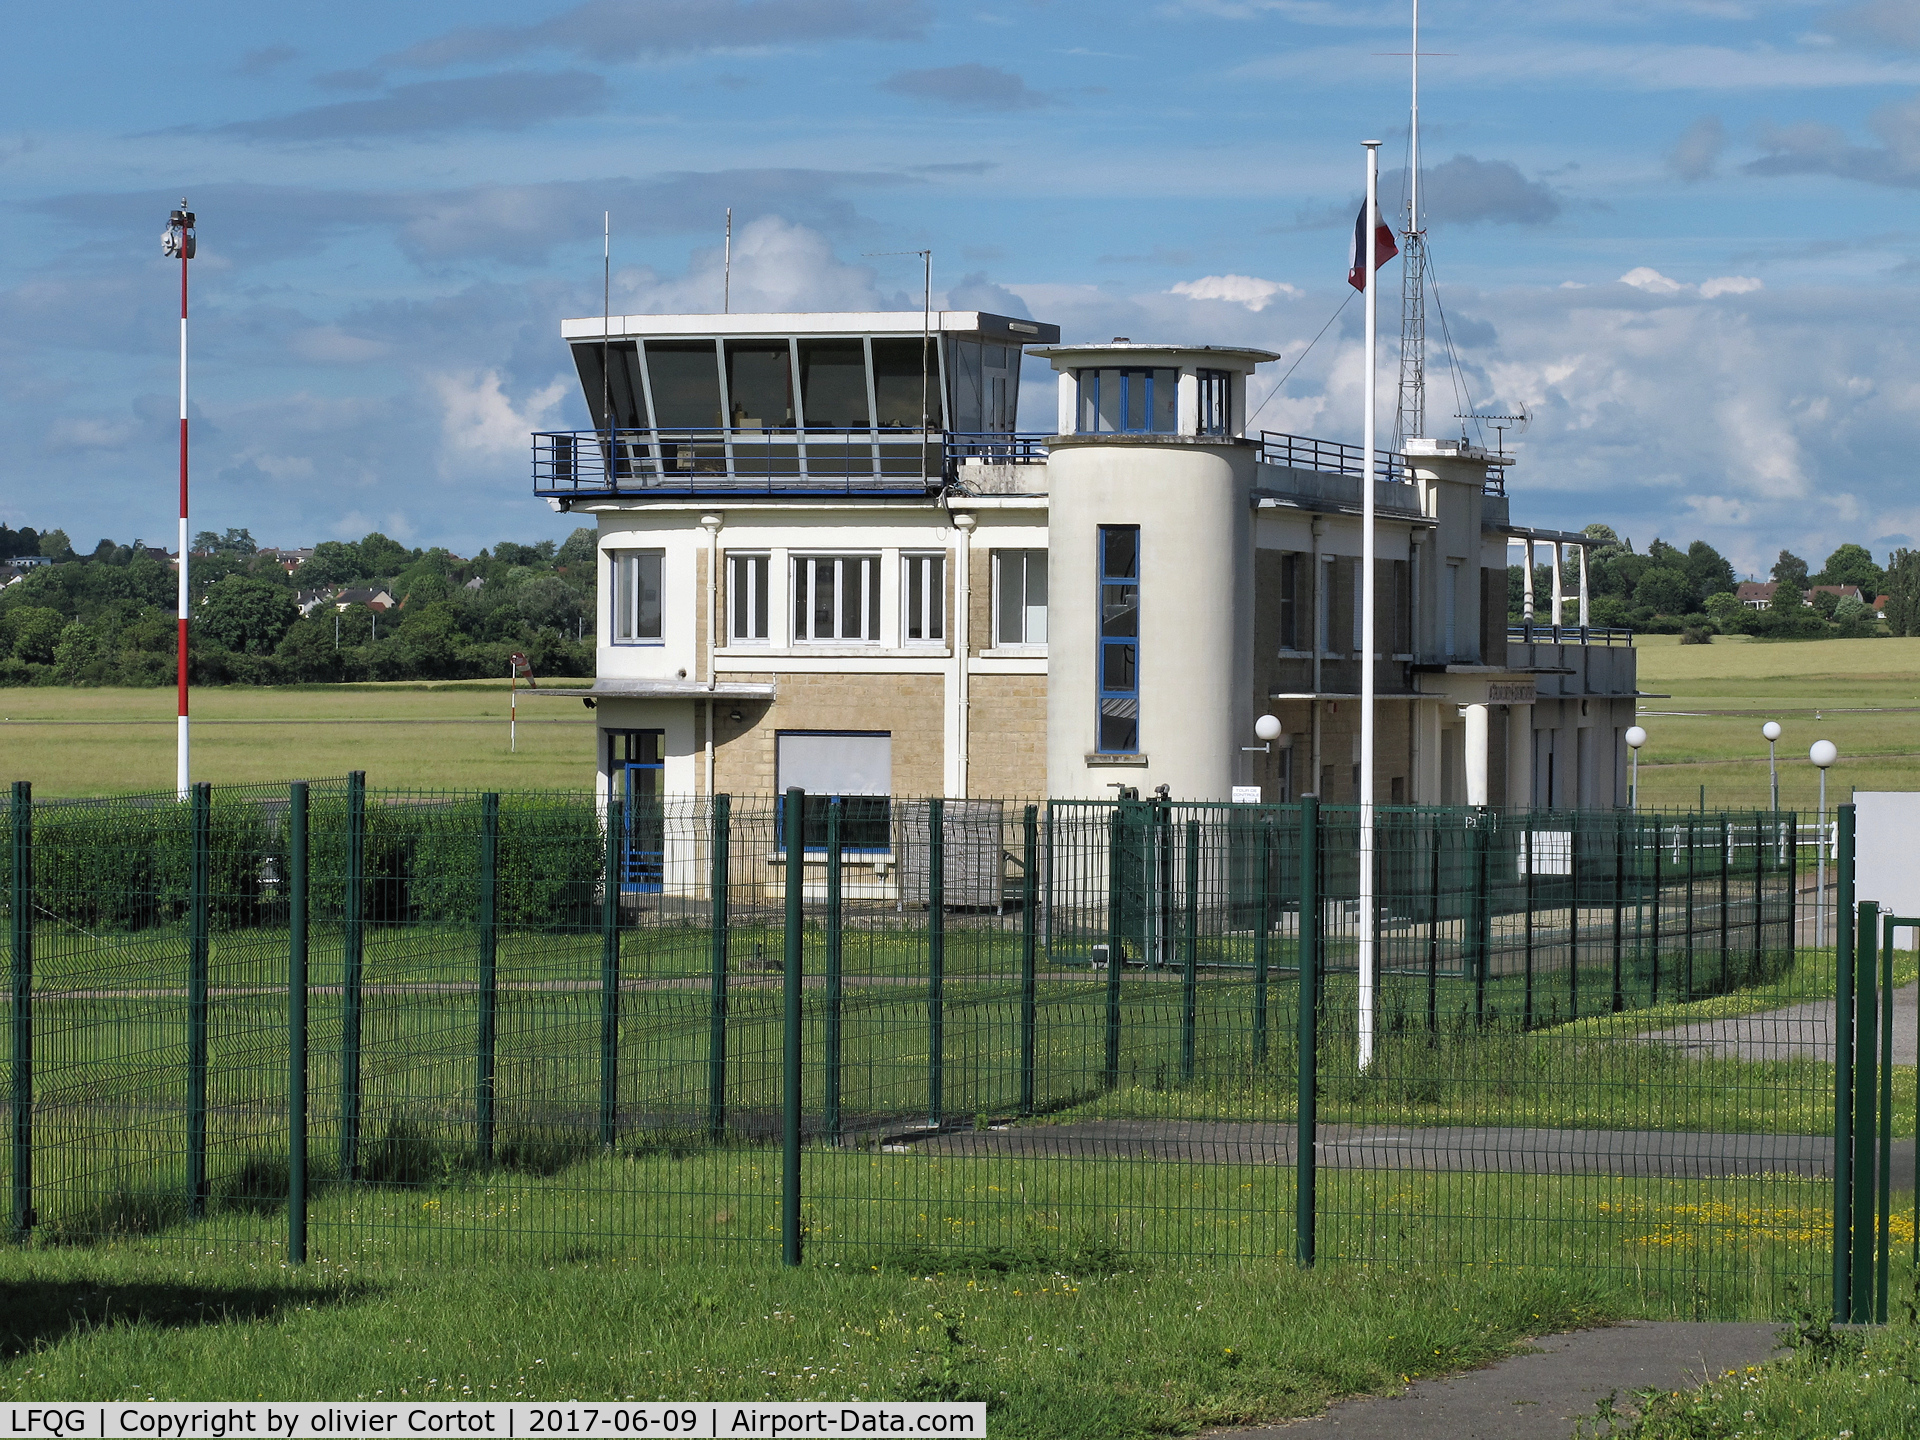 Nevers Fourchambault Airport, Nevers France (LFQG) - the control tower